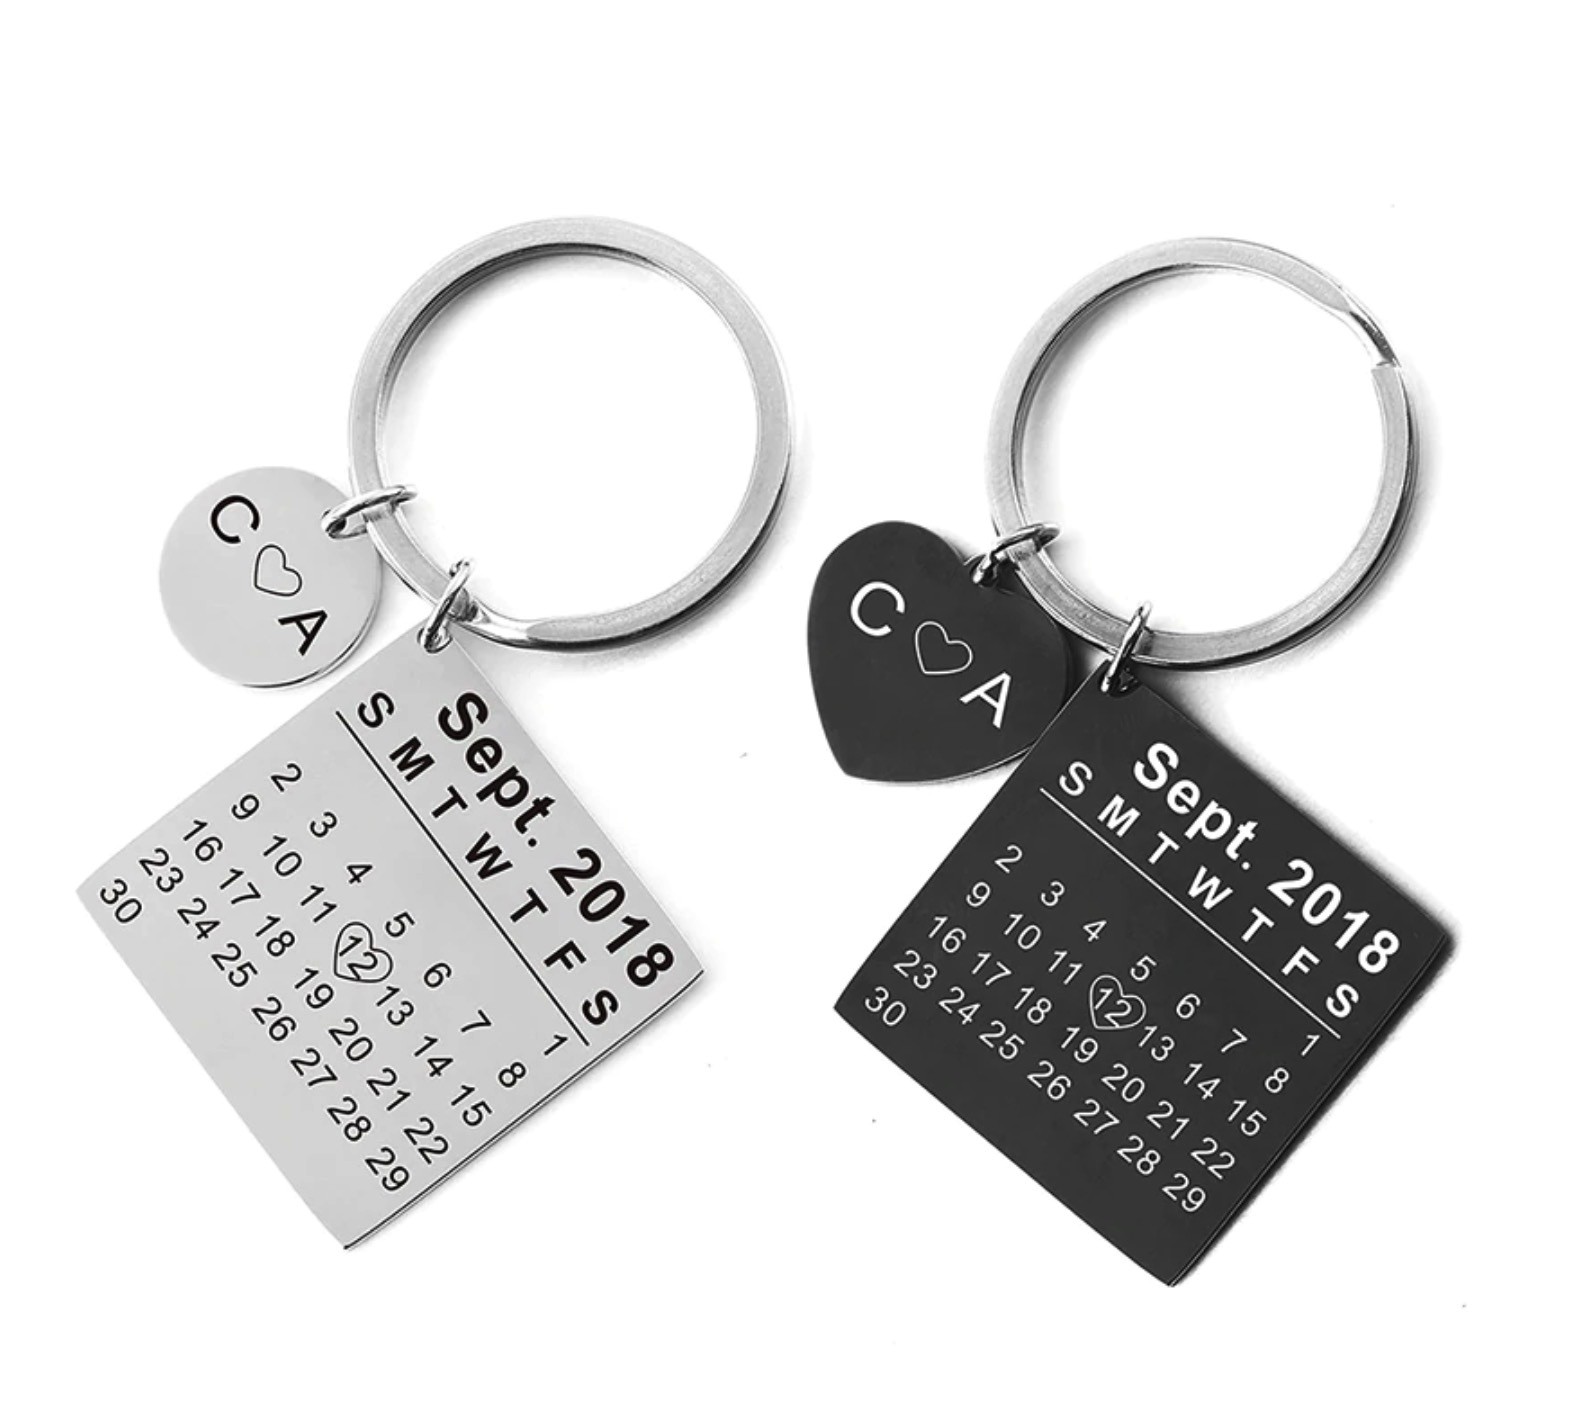 Buy this Personalized Calendar Keychain Engraved Name✵Gifts for Mom ✵ Mothers Day,✵ Christmas or Birthday or anniversary✵ Date Black Color Tag 